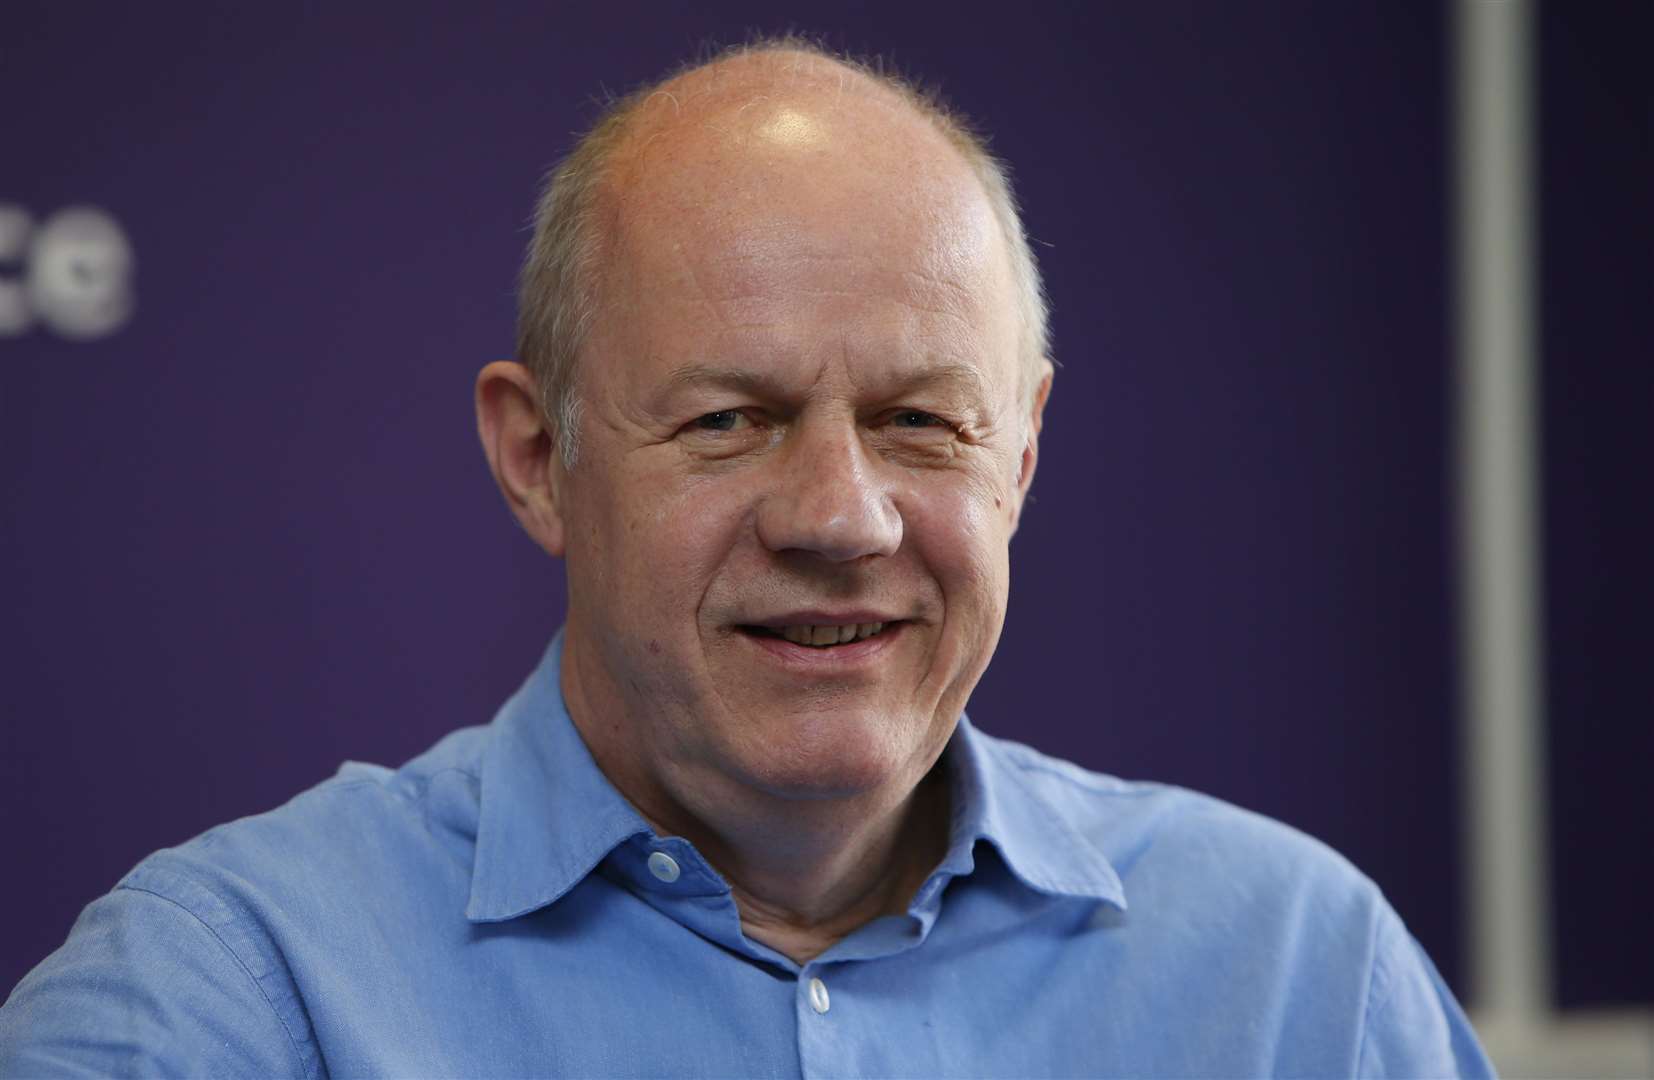 Ashford MP Damian Green described the move as a "ridiculous decision" which had to be changed